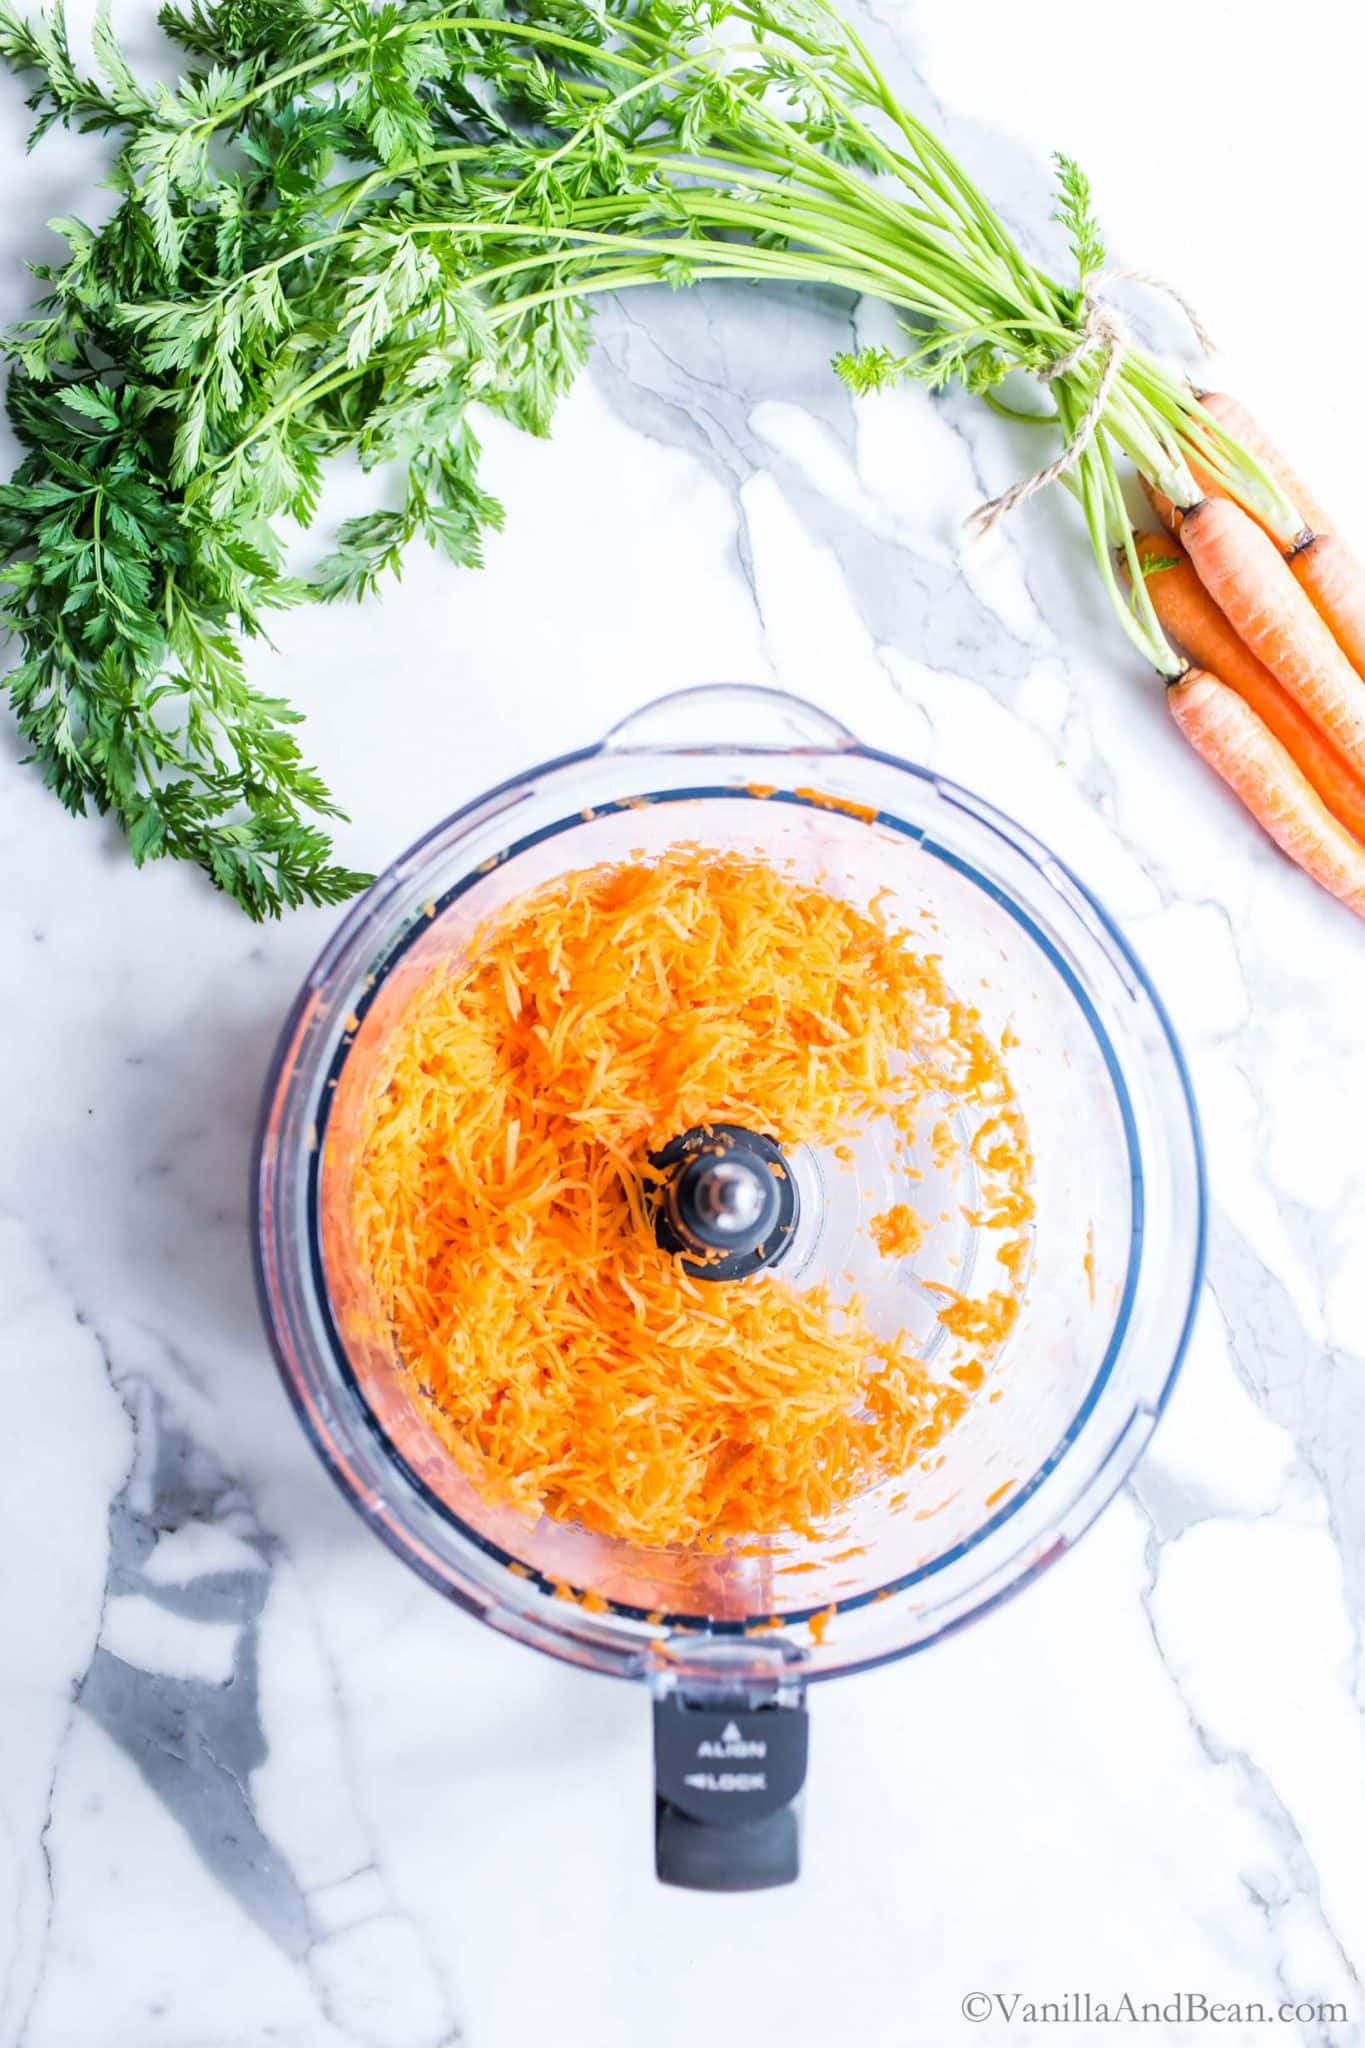 Shredded carrots in a food processor bowl.